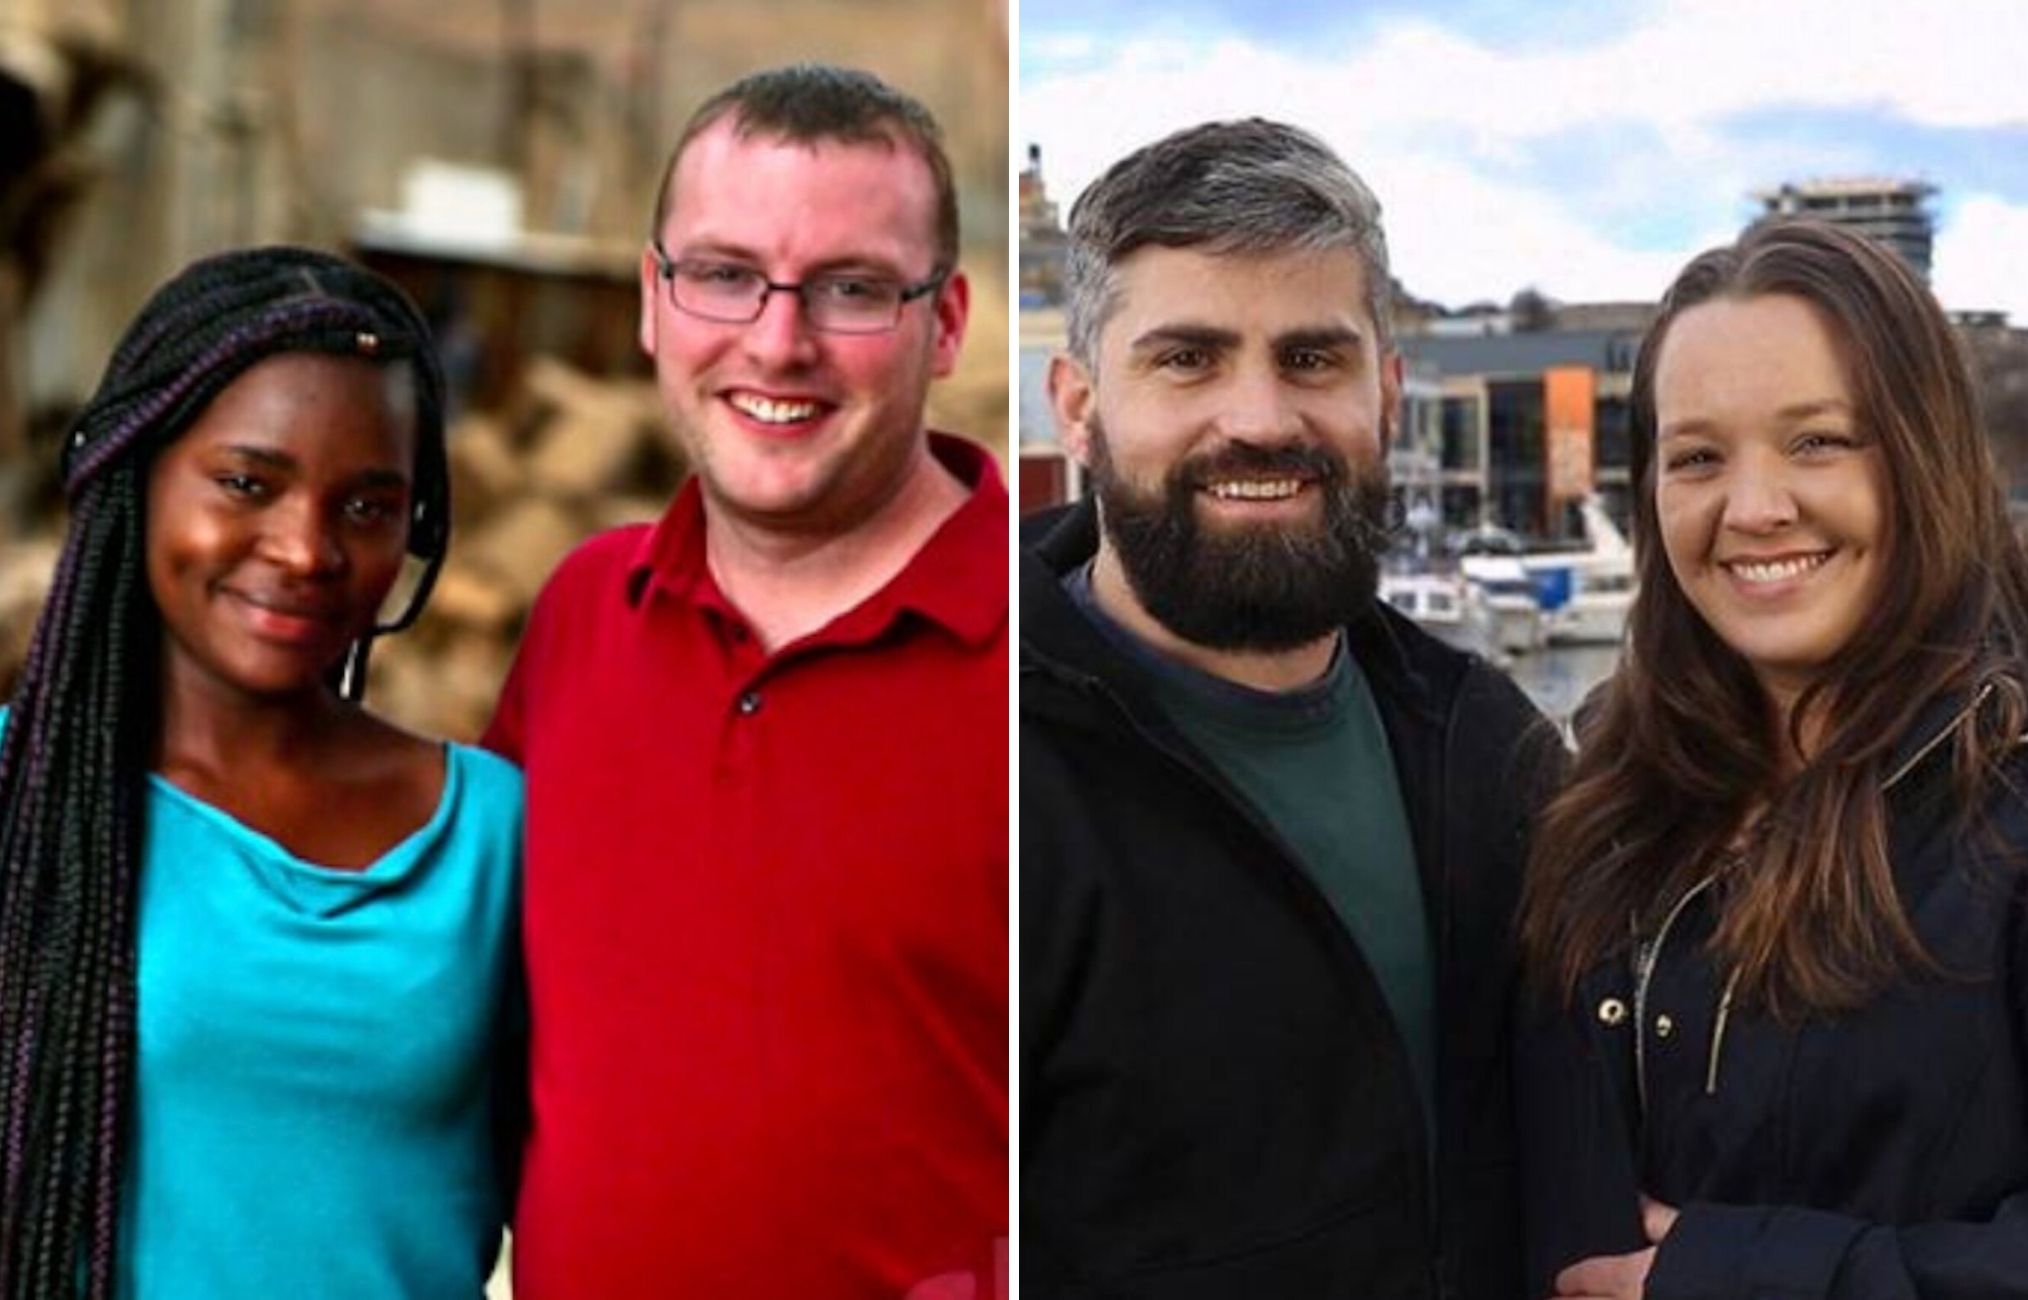 90 Day Fiancé: Before the 90 Days': Which Couples Are Still Together? 